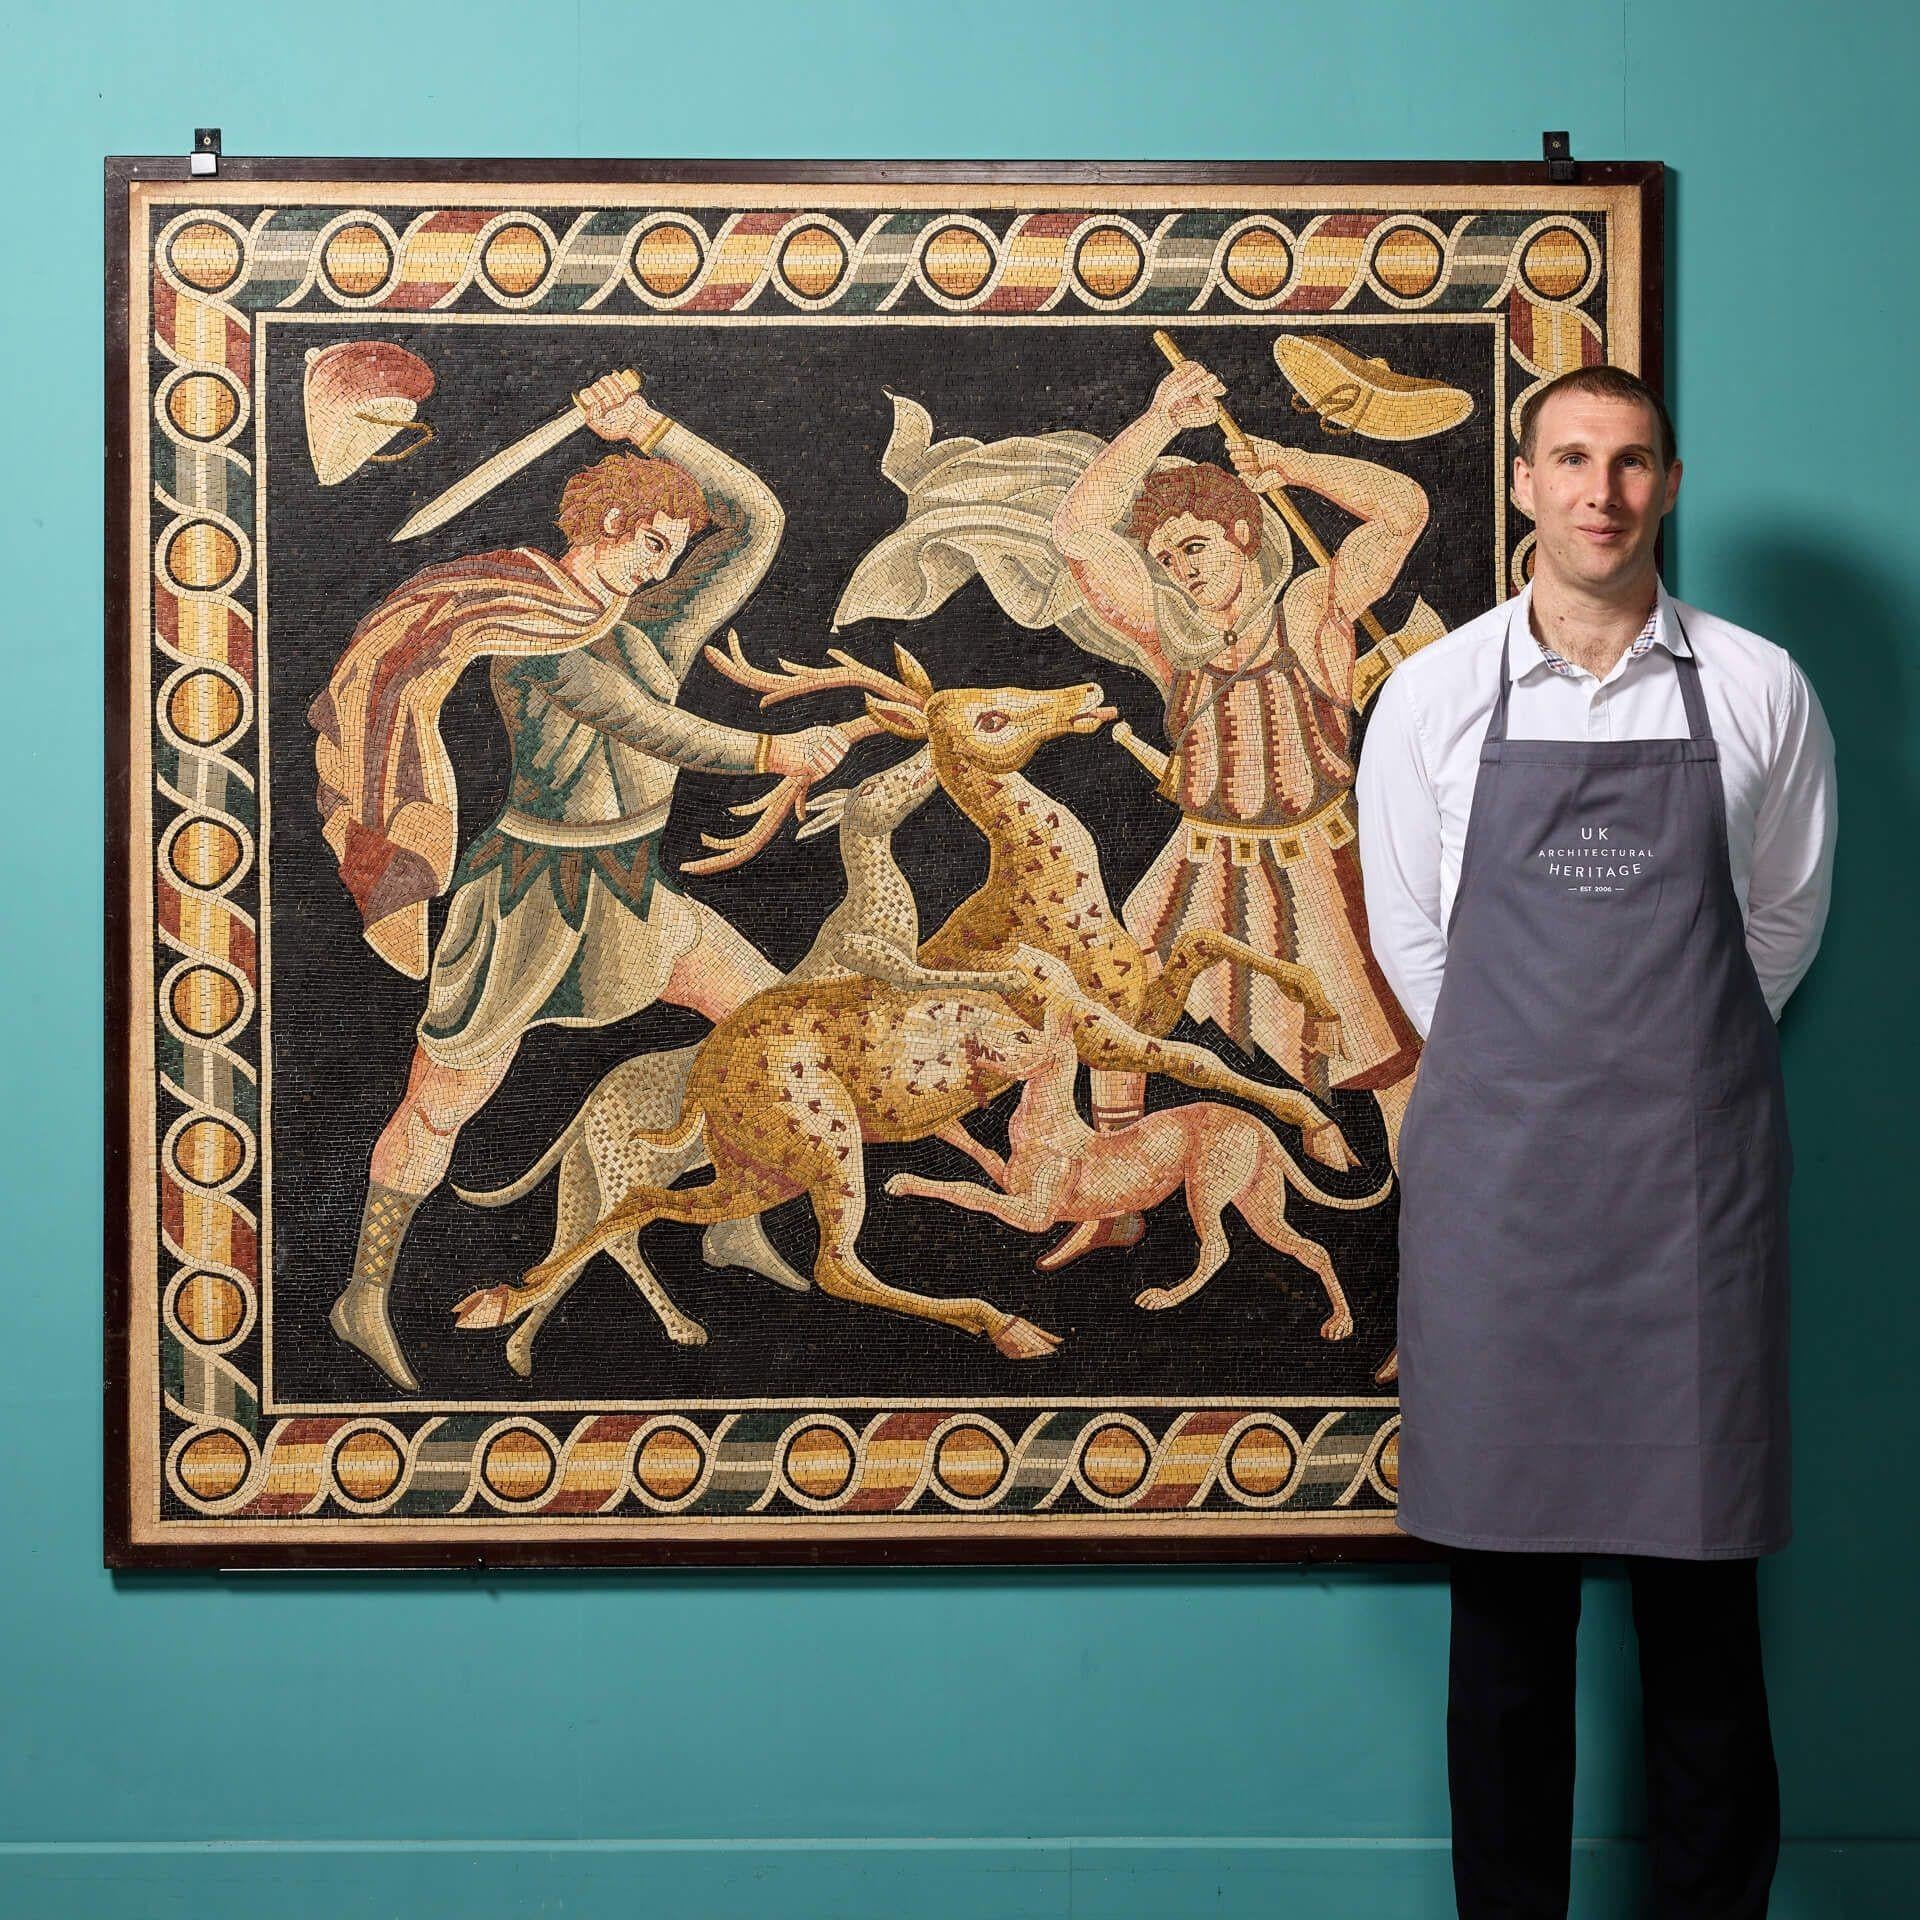 A large and intricately made Greek style mosaic wall art panel inspired by “The Stag Hunt”, a 4th century mosaic found in Pella, Greece, and signed by ancient Greek artist, Gnosis.

Small tessera mosaic tiles are used to depict two hunters in